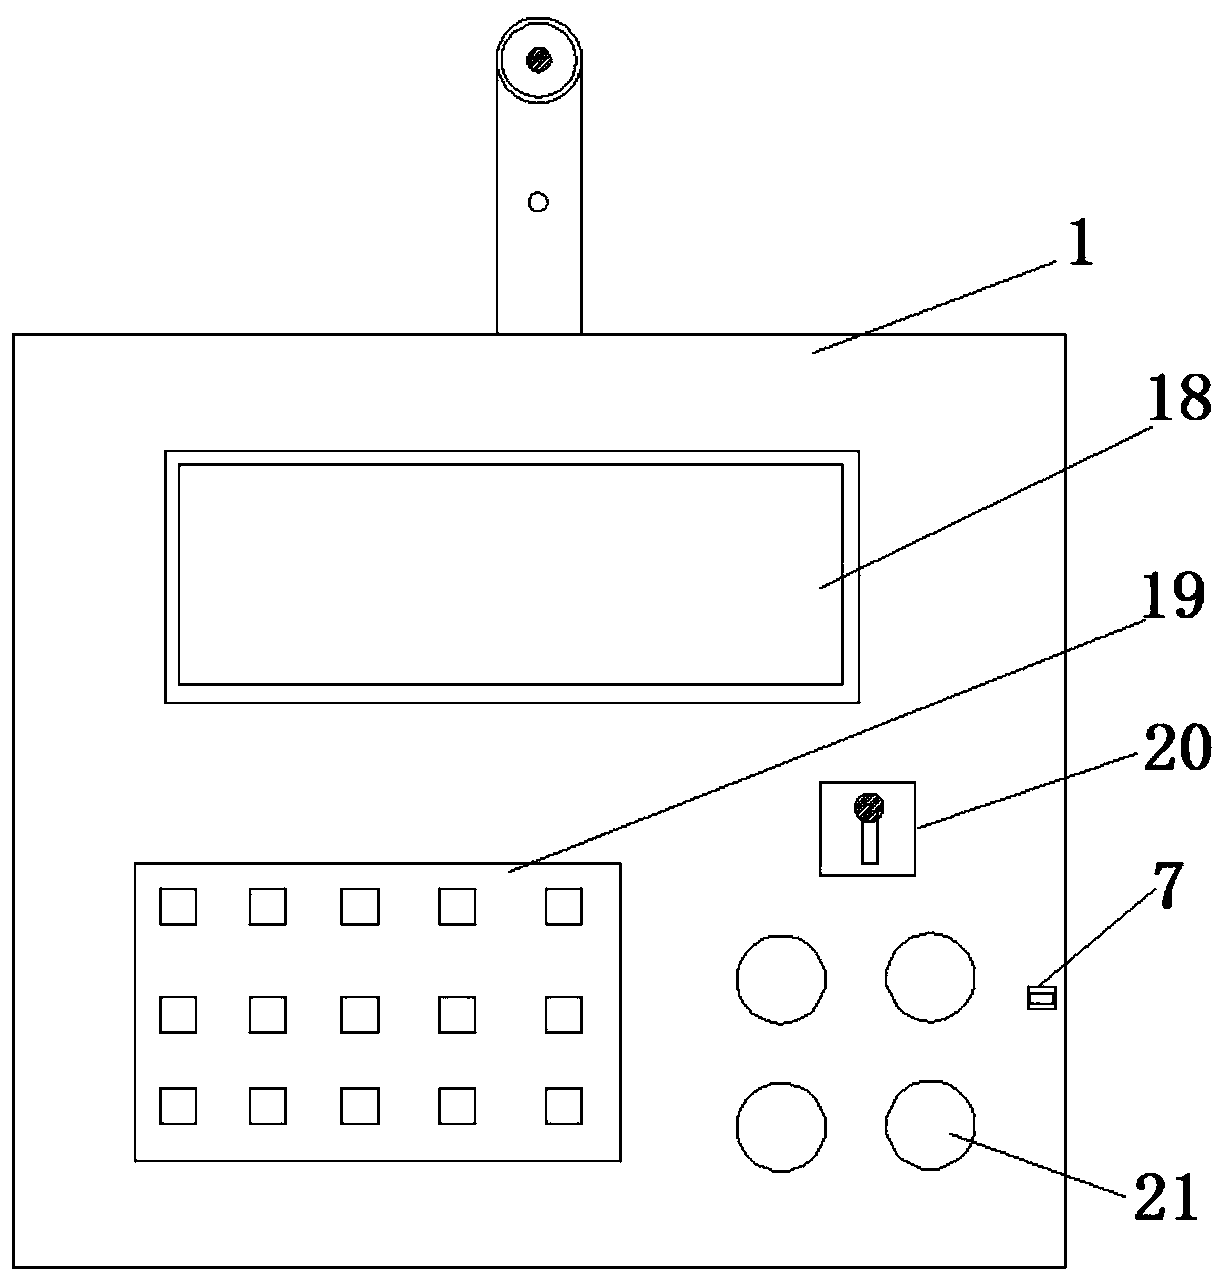 Novel artificial intelligence education interaction device